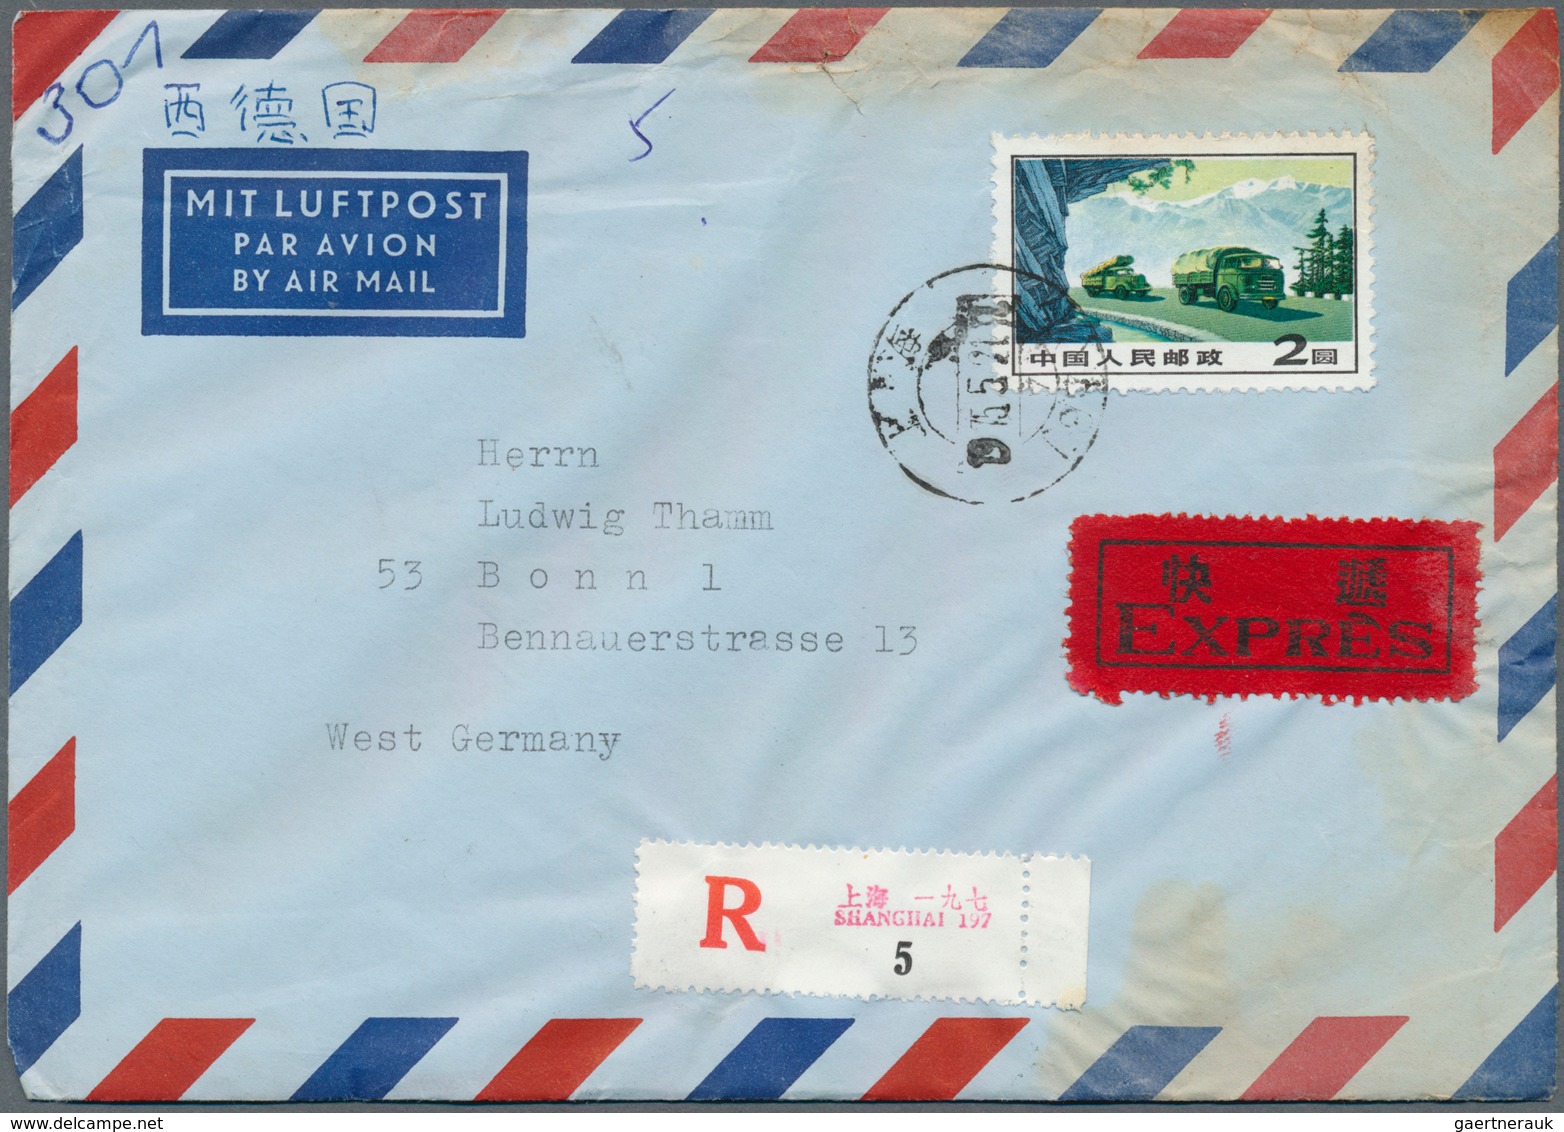 22437 China - Volksrepublik: 1949/88, covers with definitives (25) mostly used to Germany or Hong Kong.